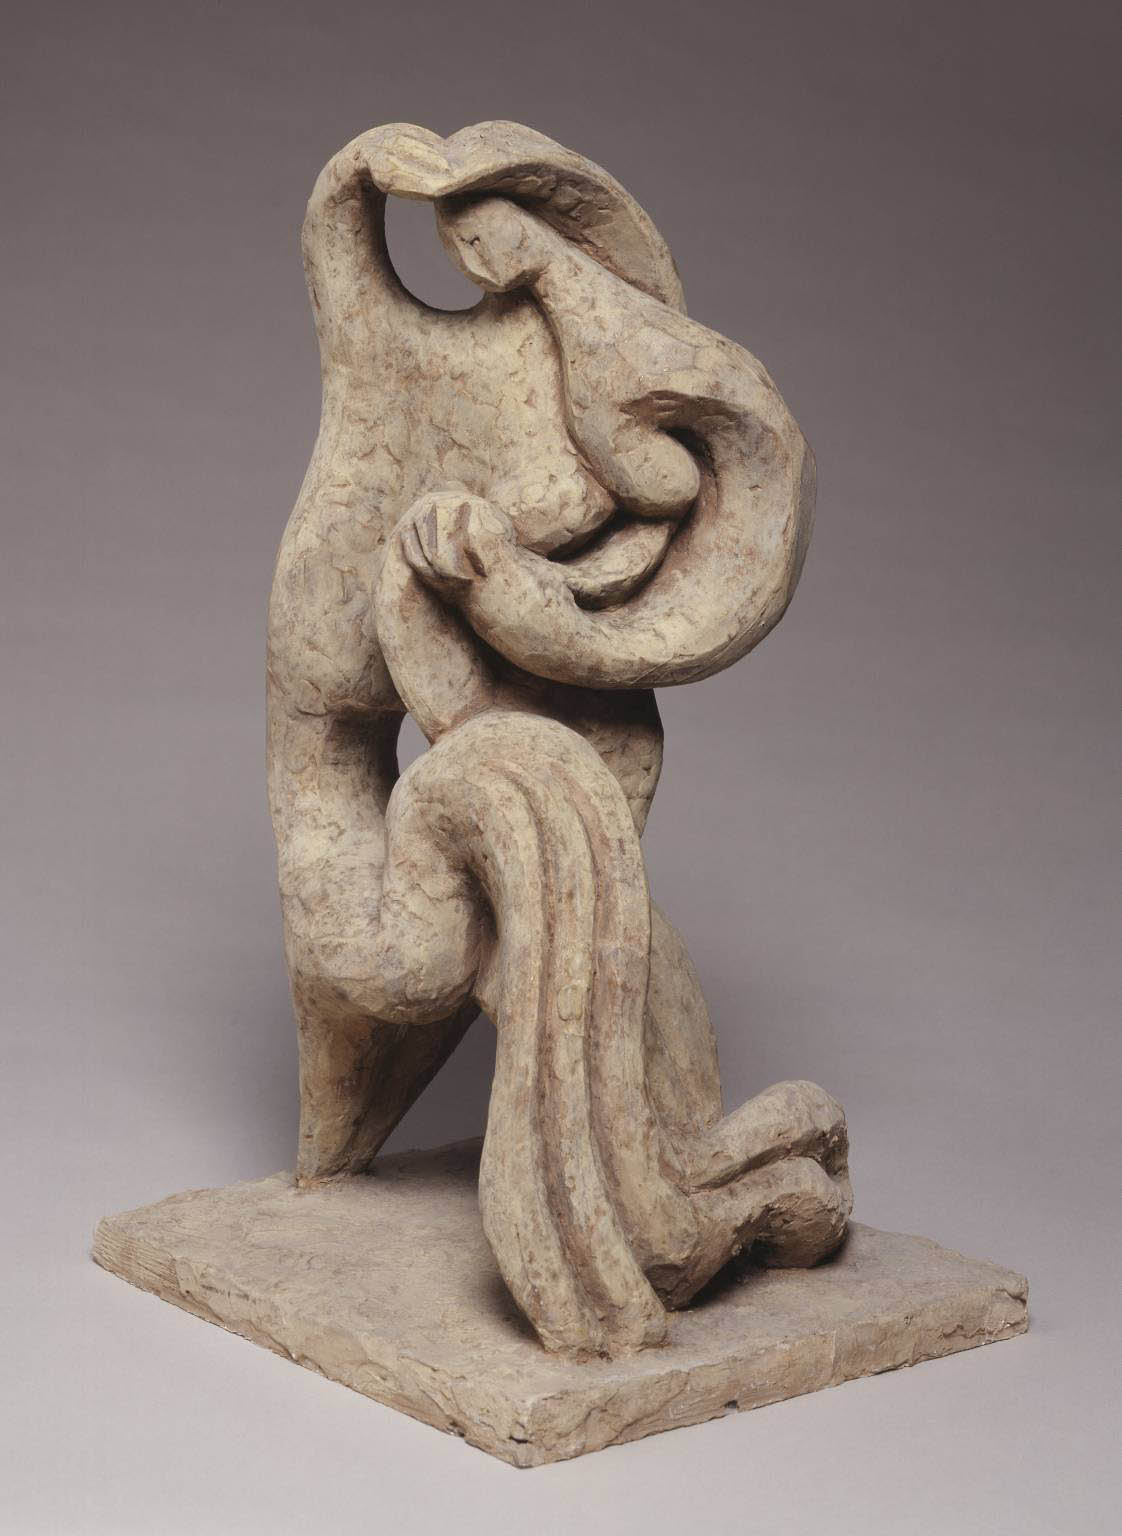 Mother and Child I 1949 by Jacques Lipchitz 1891-1973